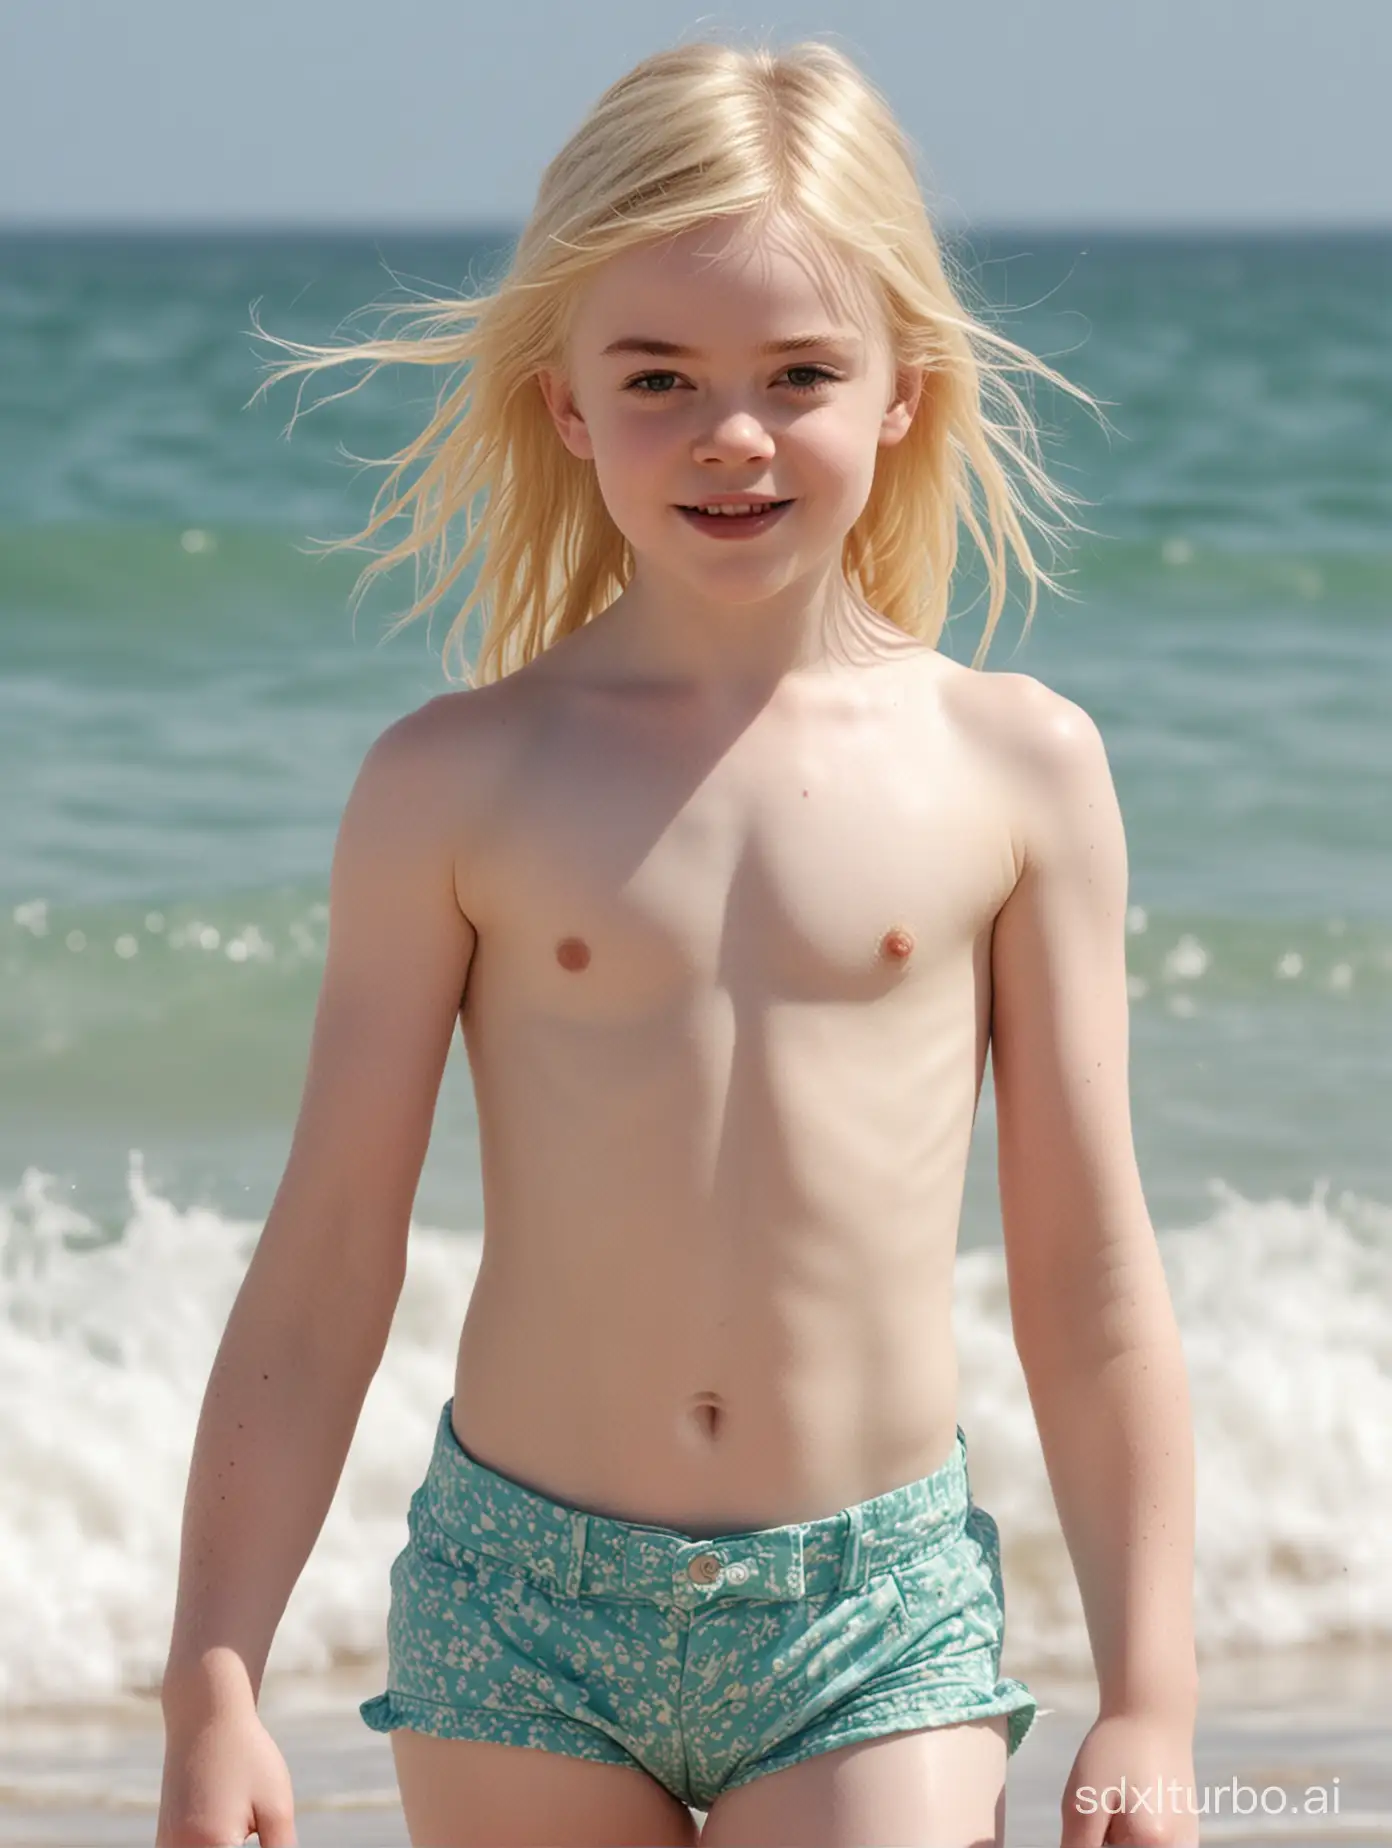 Elle Fanning at 8 years old, blond hair, very muscular abs, at beach